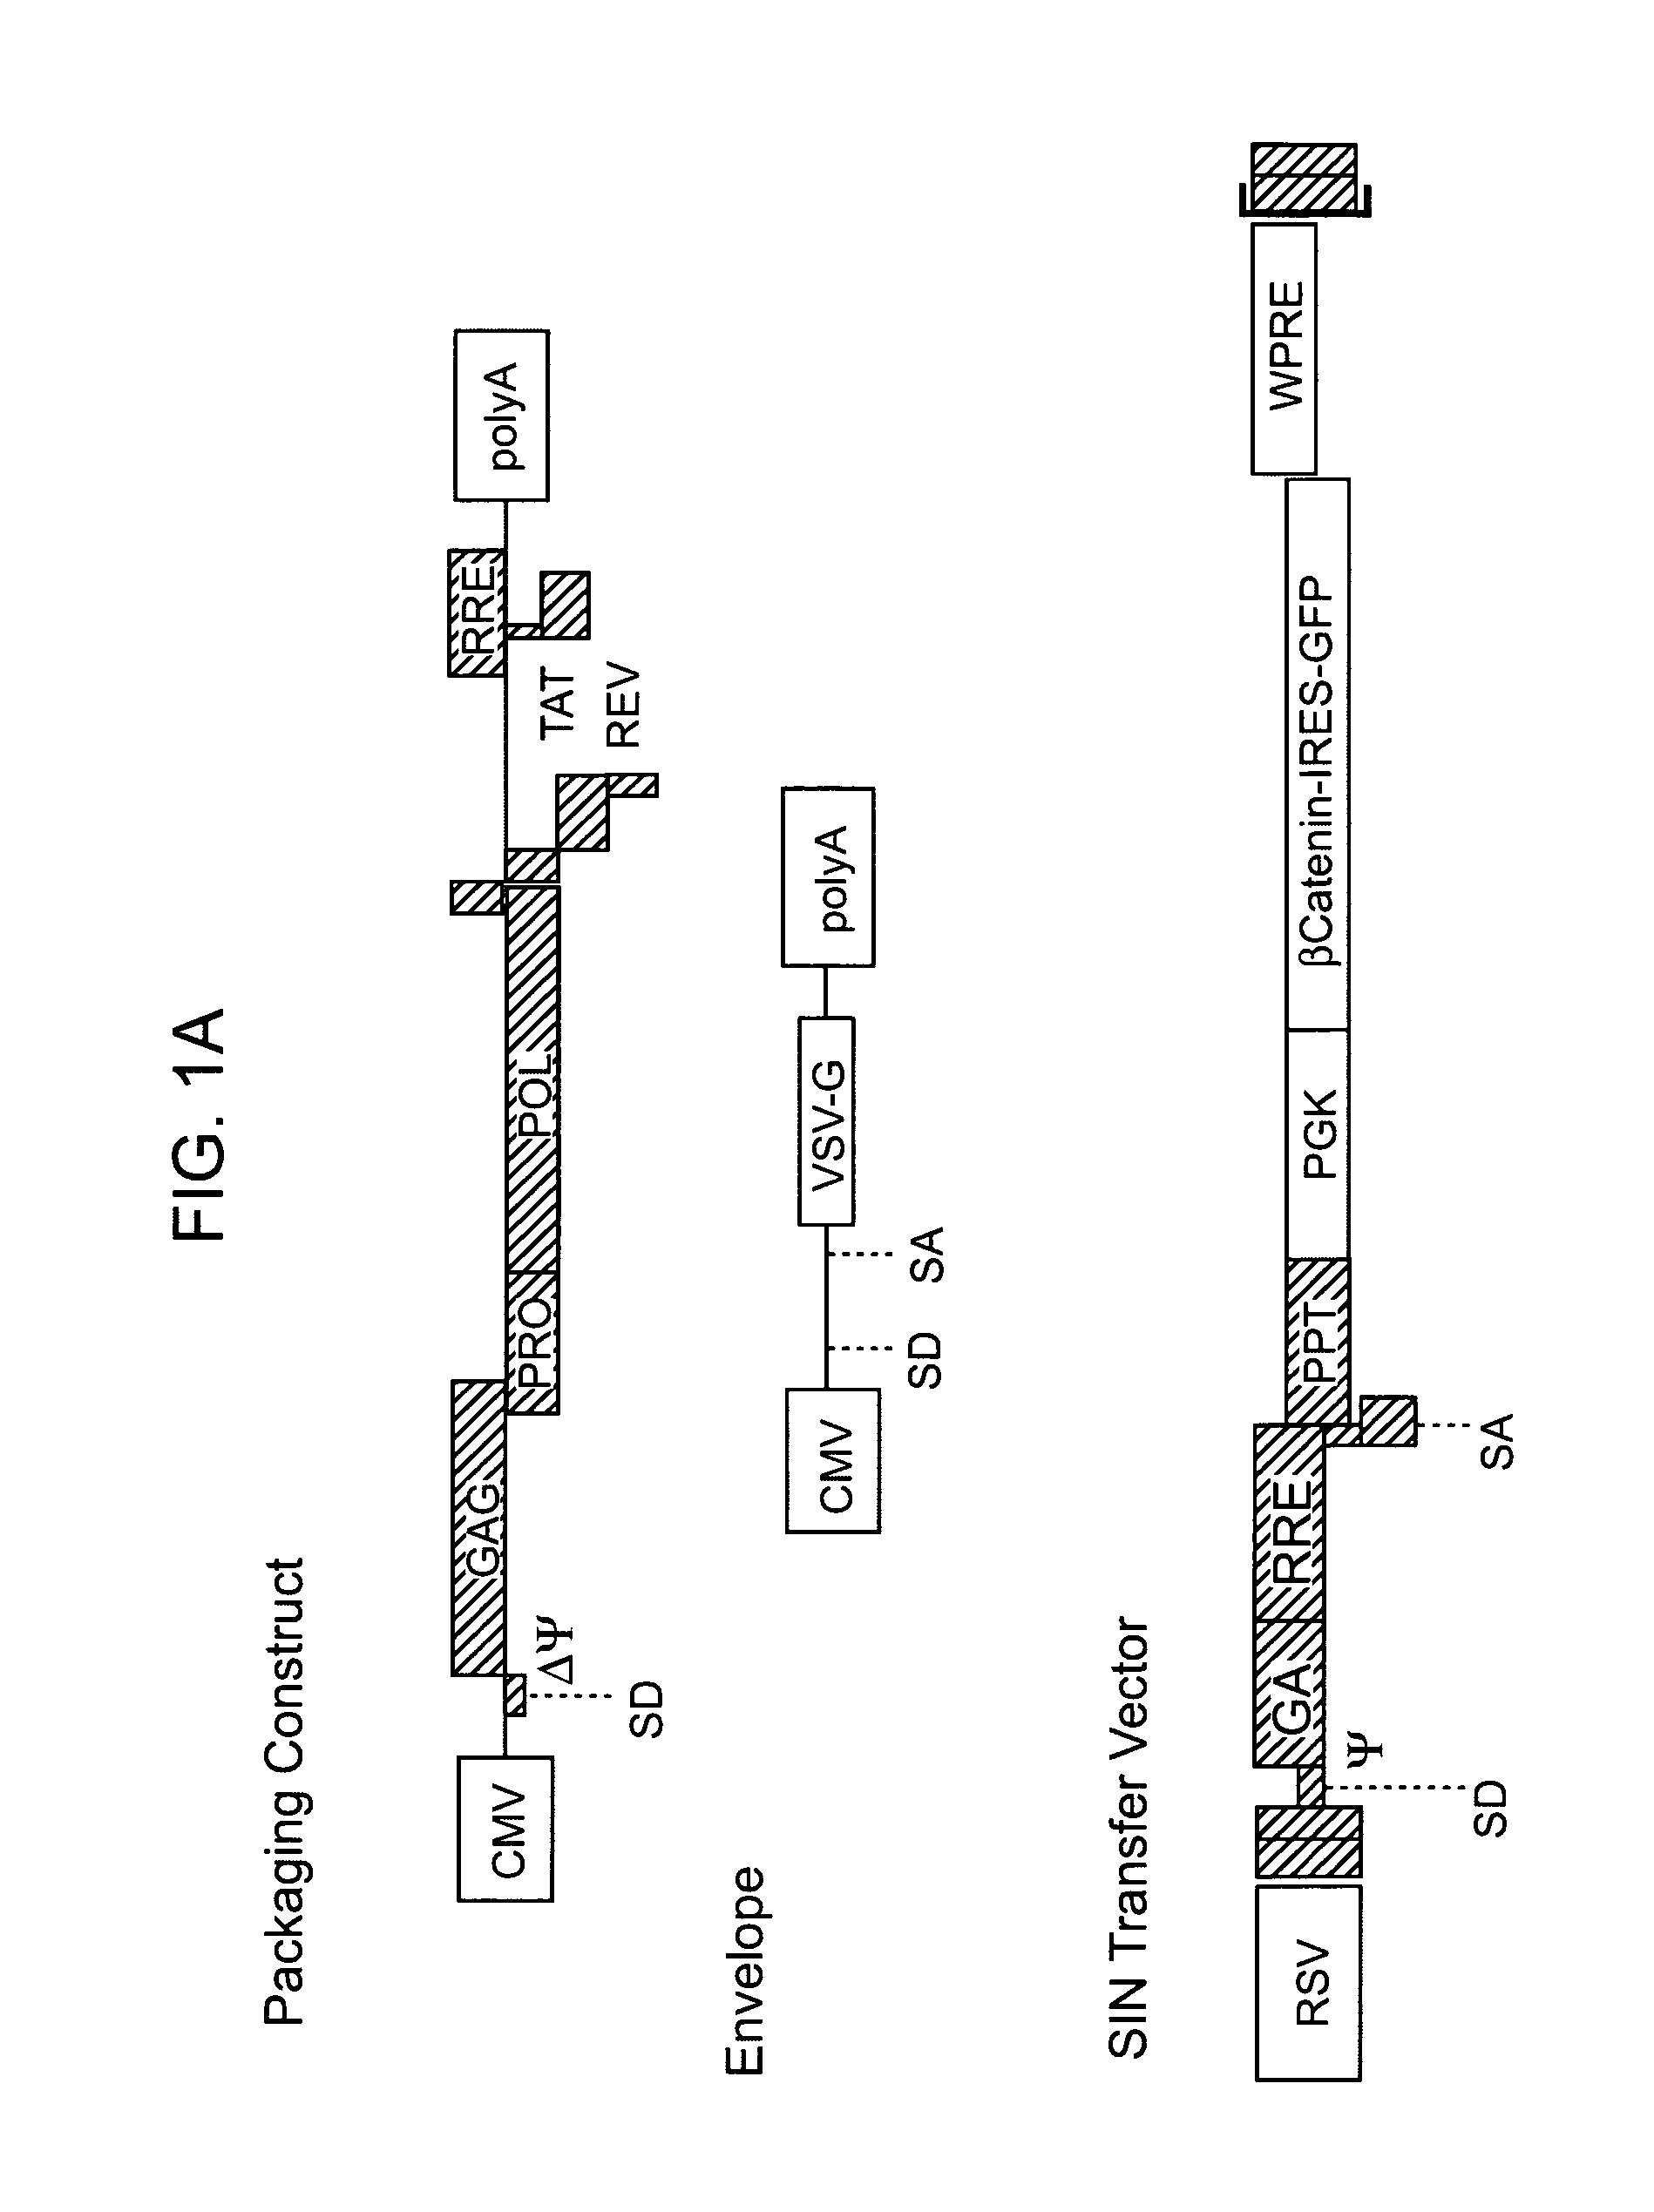 Methods of identifying and isolating stem cells and cancer stem cells